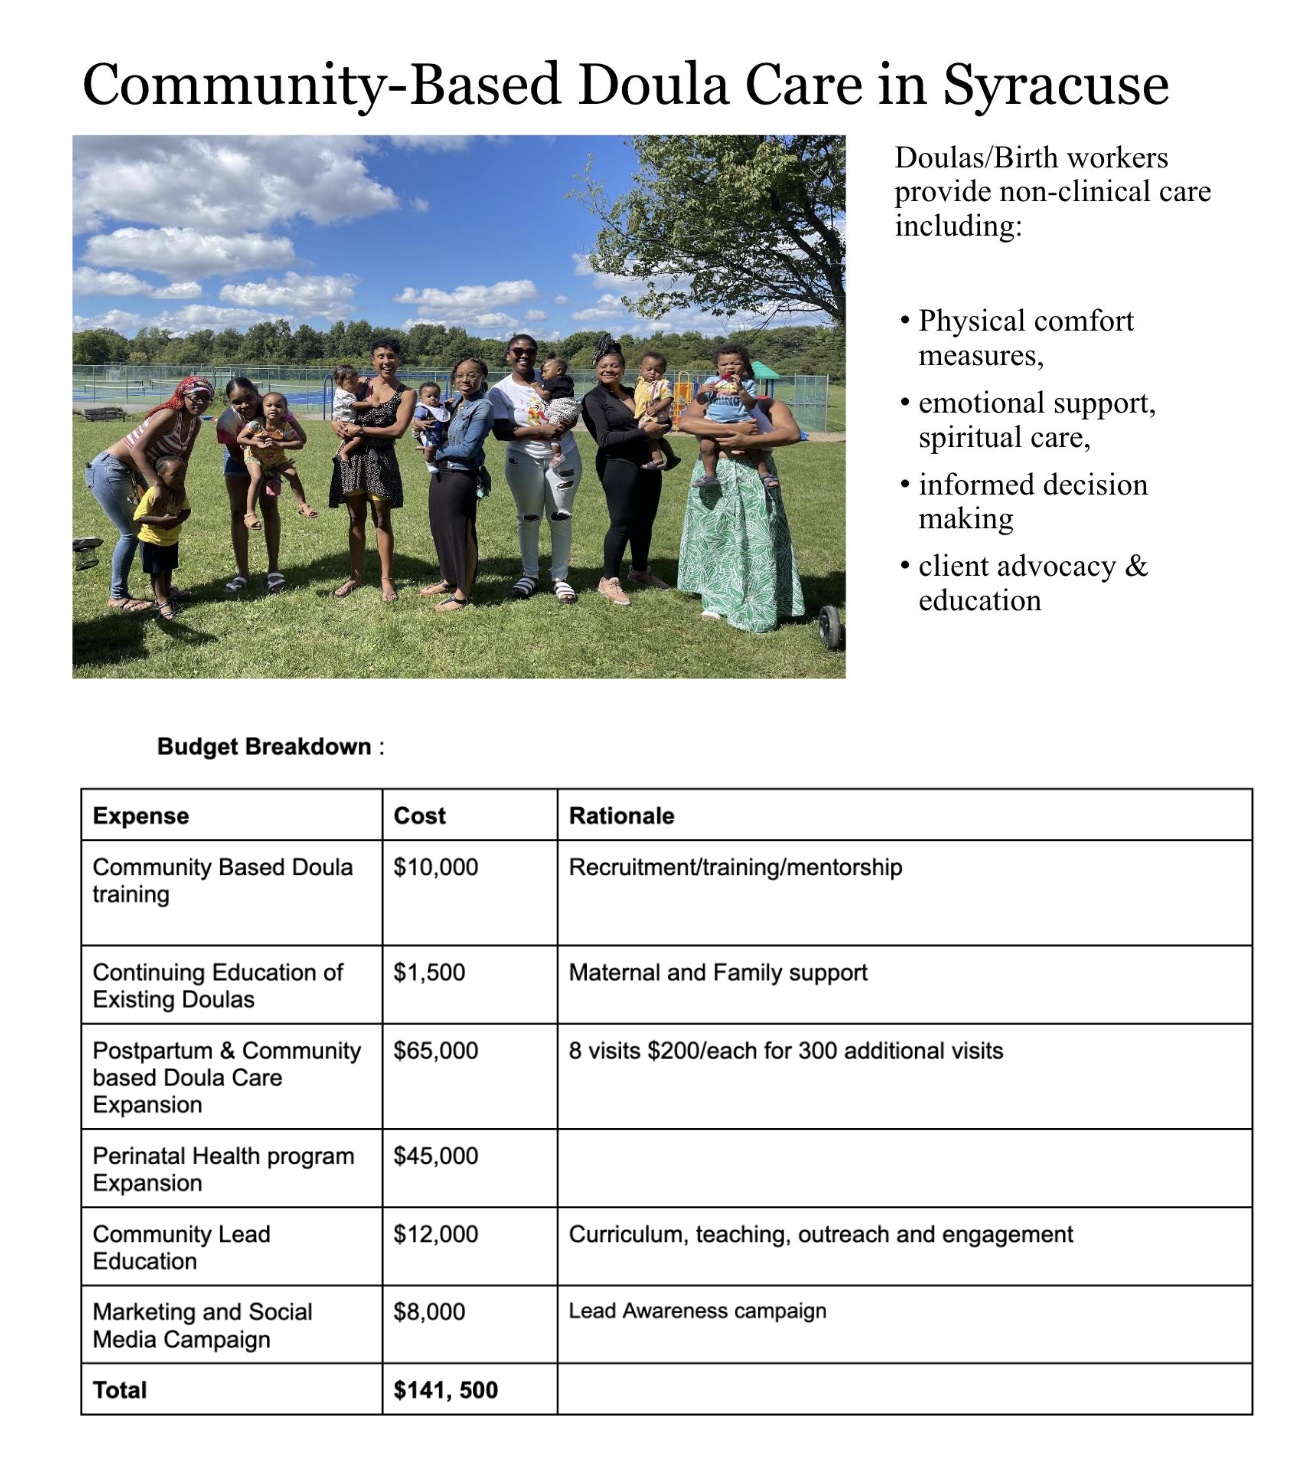 Village Birth International Sankofa Healing Center budget breakdown for Community based Doula Care and Lead Awareness Expansion Project 